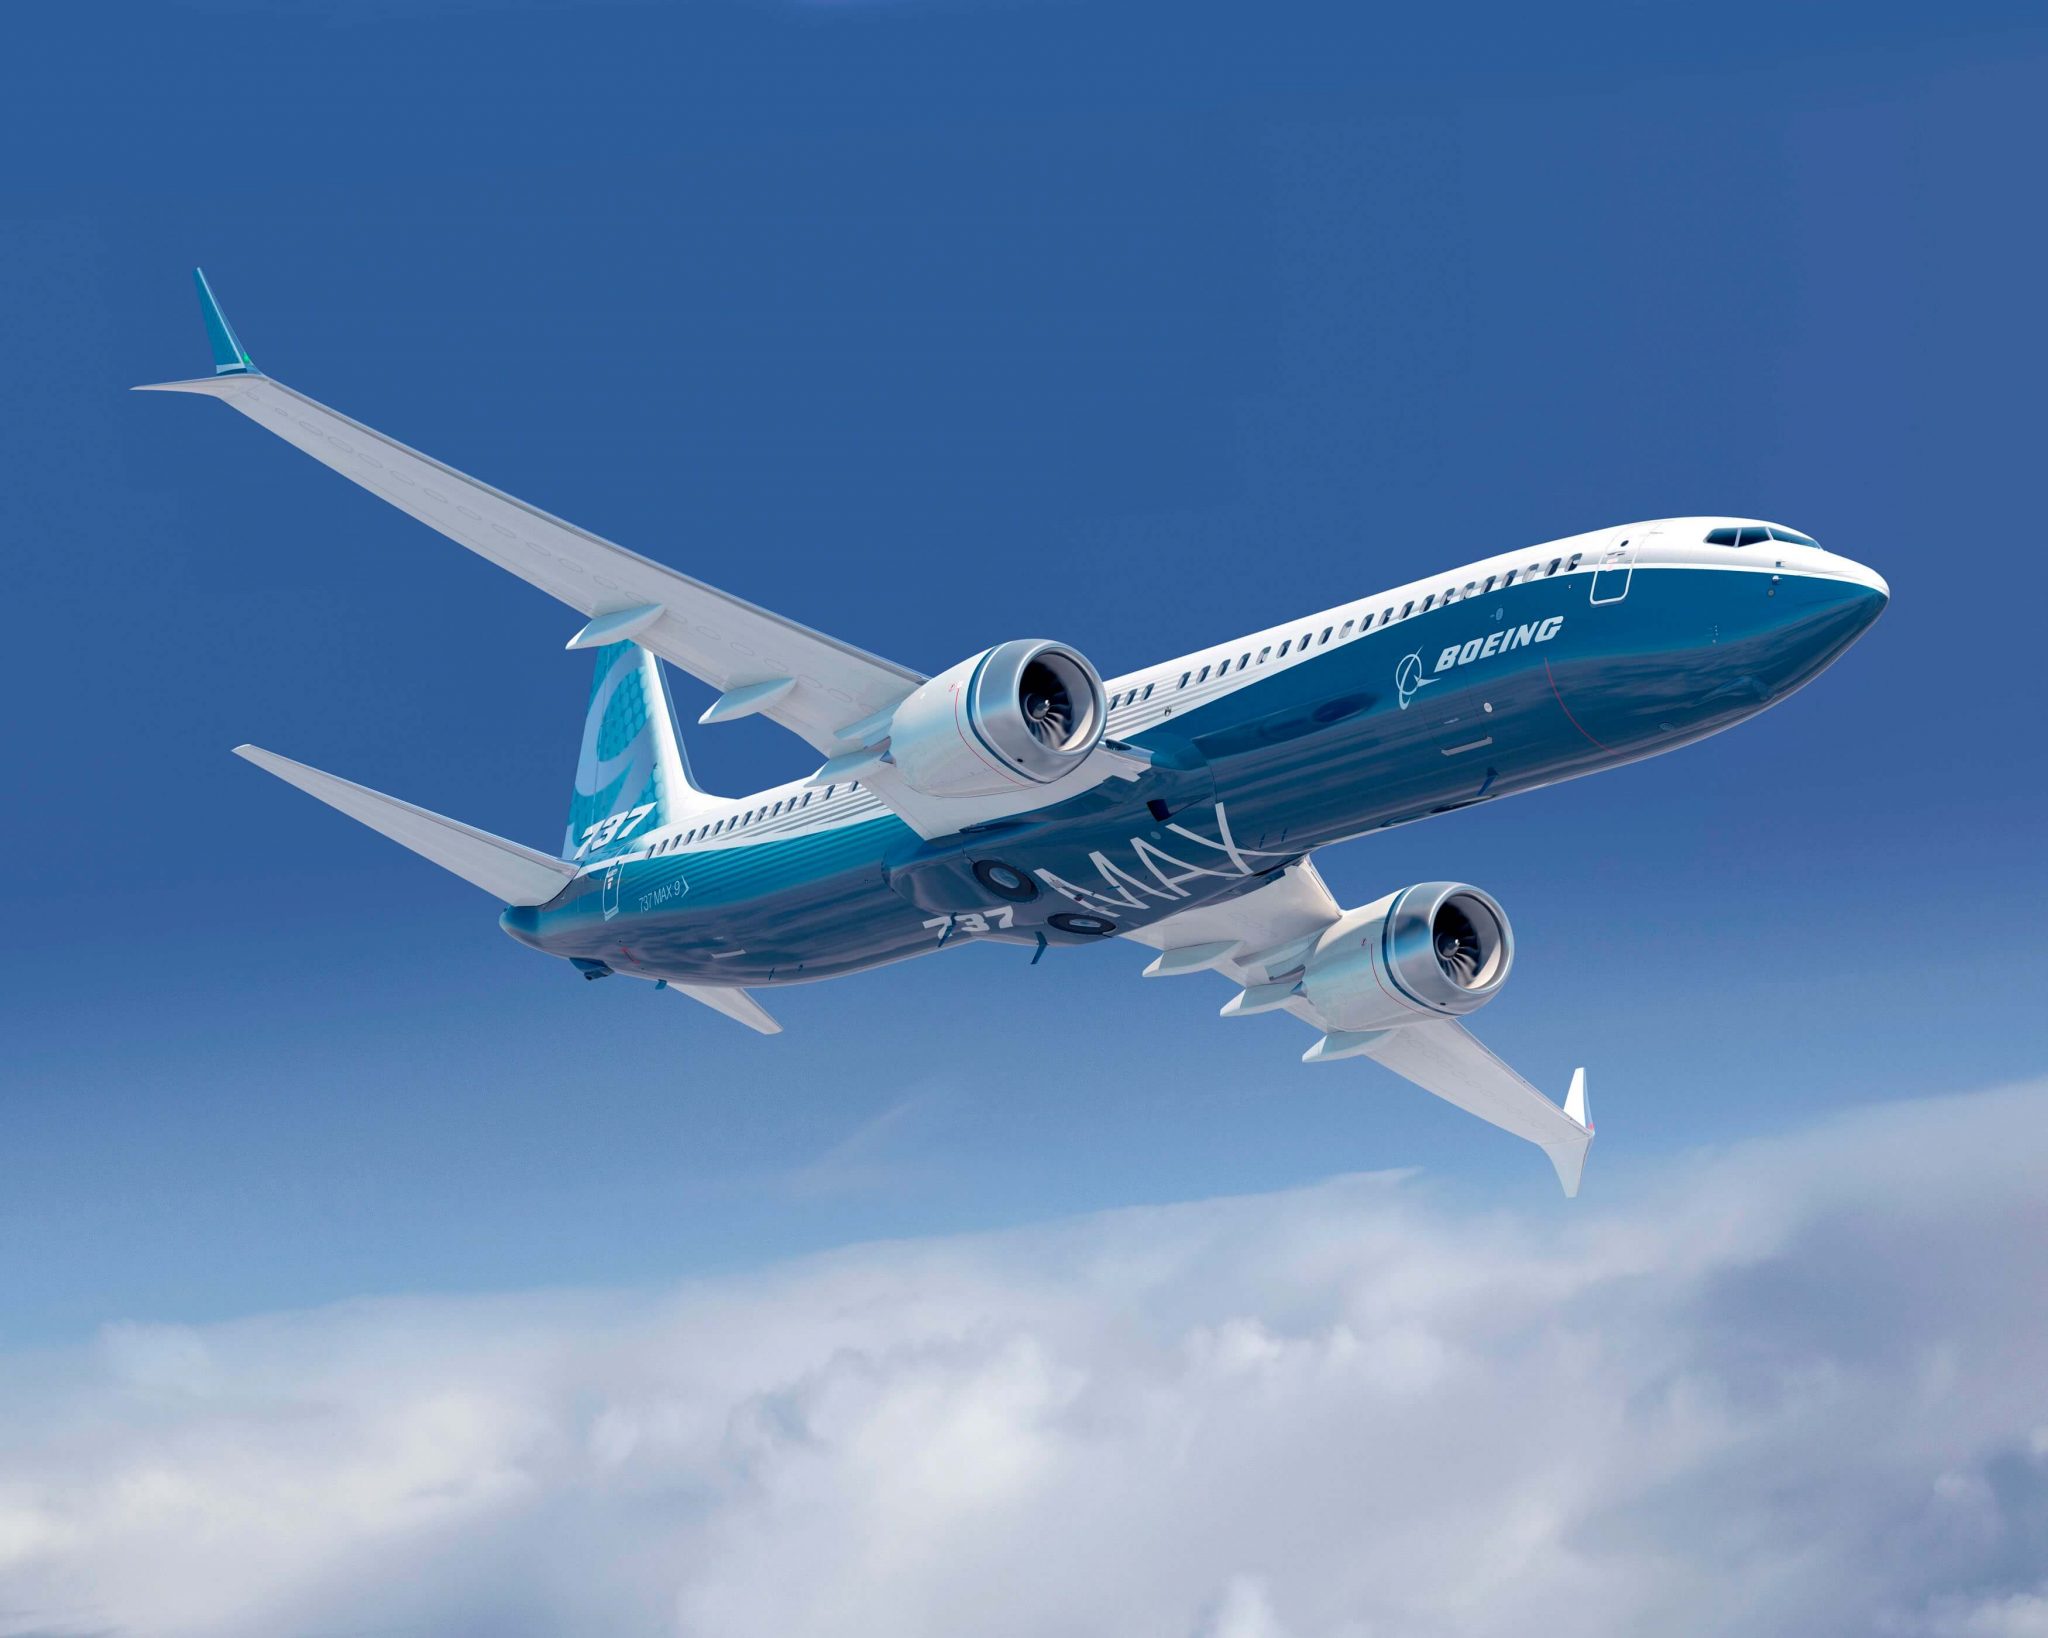 ALC announces orders and commitments for 78 Boeing aircraft